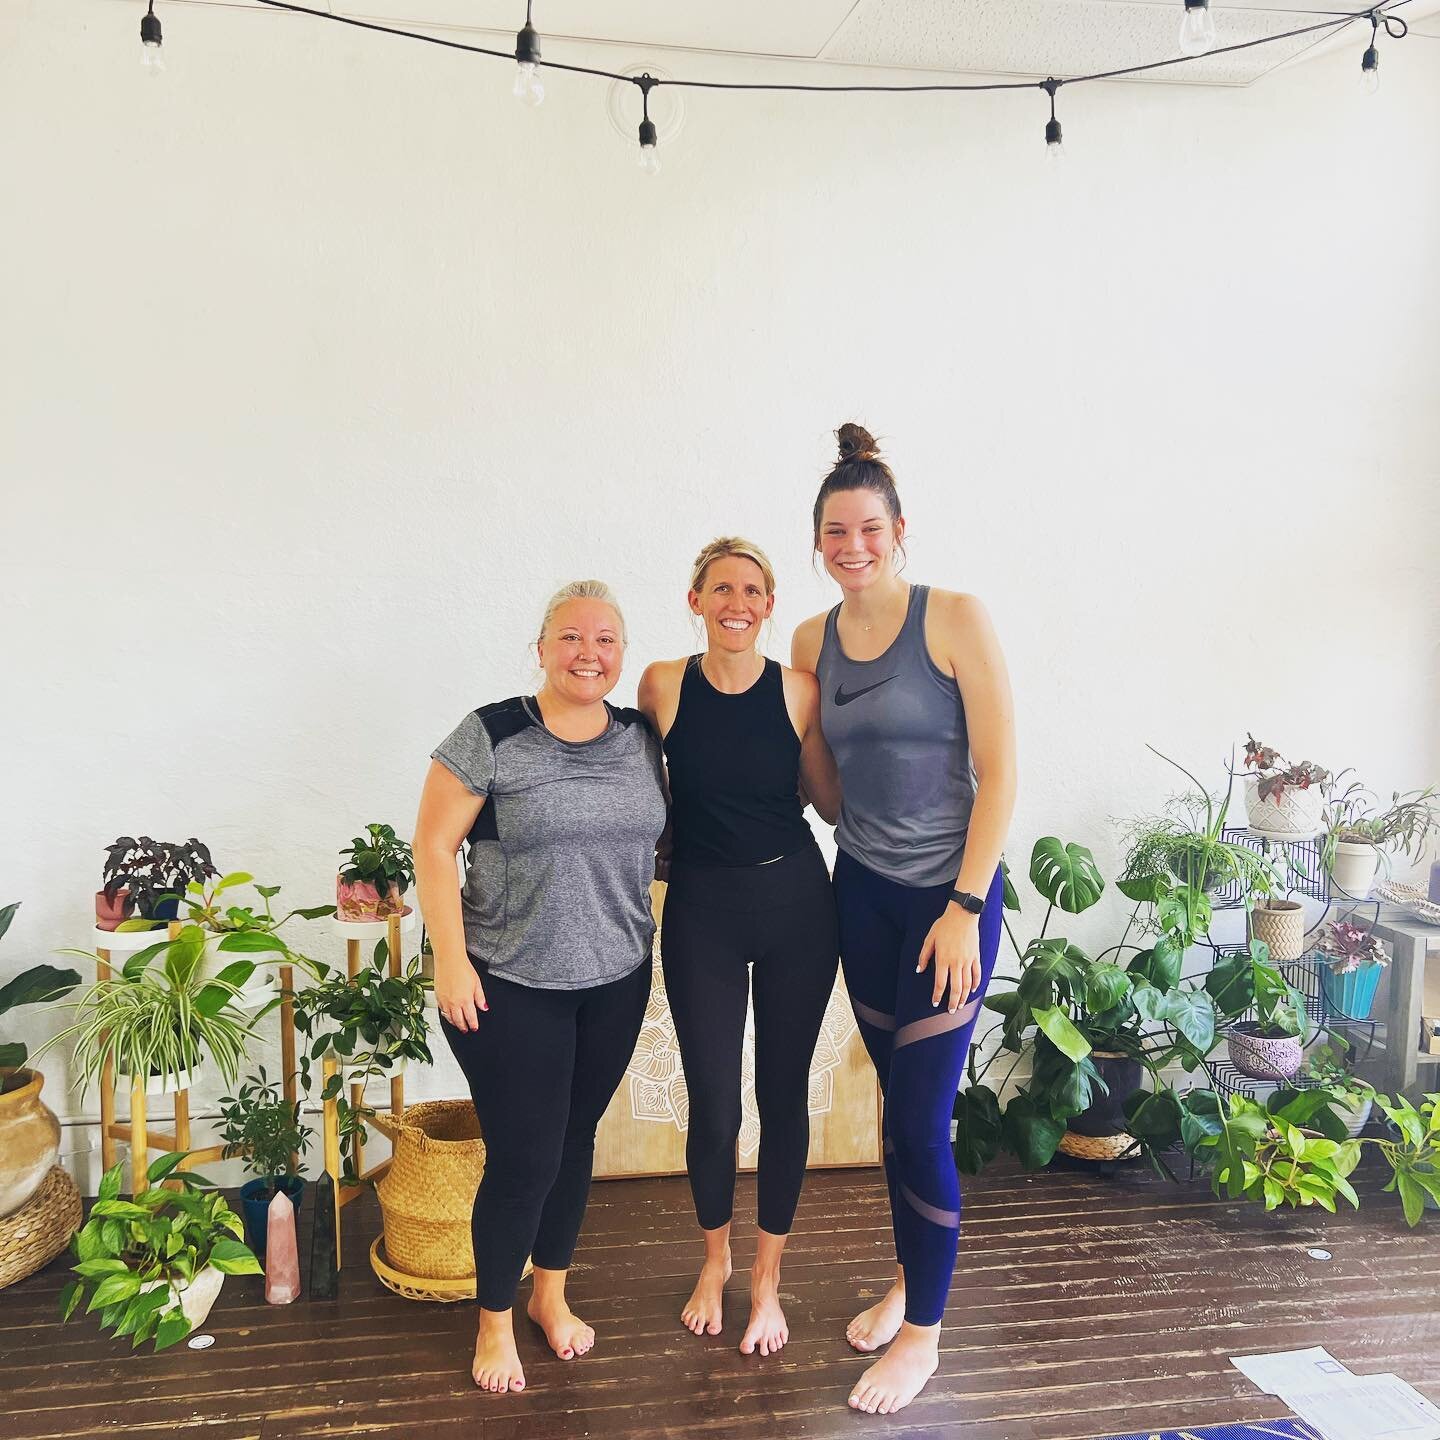 When your friends come to your hot yoga class! 🙌🏼🥰🥵 Seriously, sharing my love for yoga with my friends is one of my favorite things!

@crystaljhahn &amp; @mal_beasler I love y&rsquo;all! Thanks for being such supportive, fun, sweet friends in my